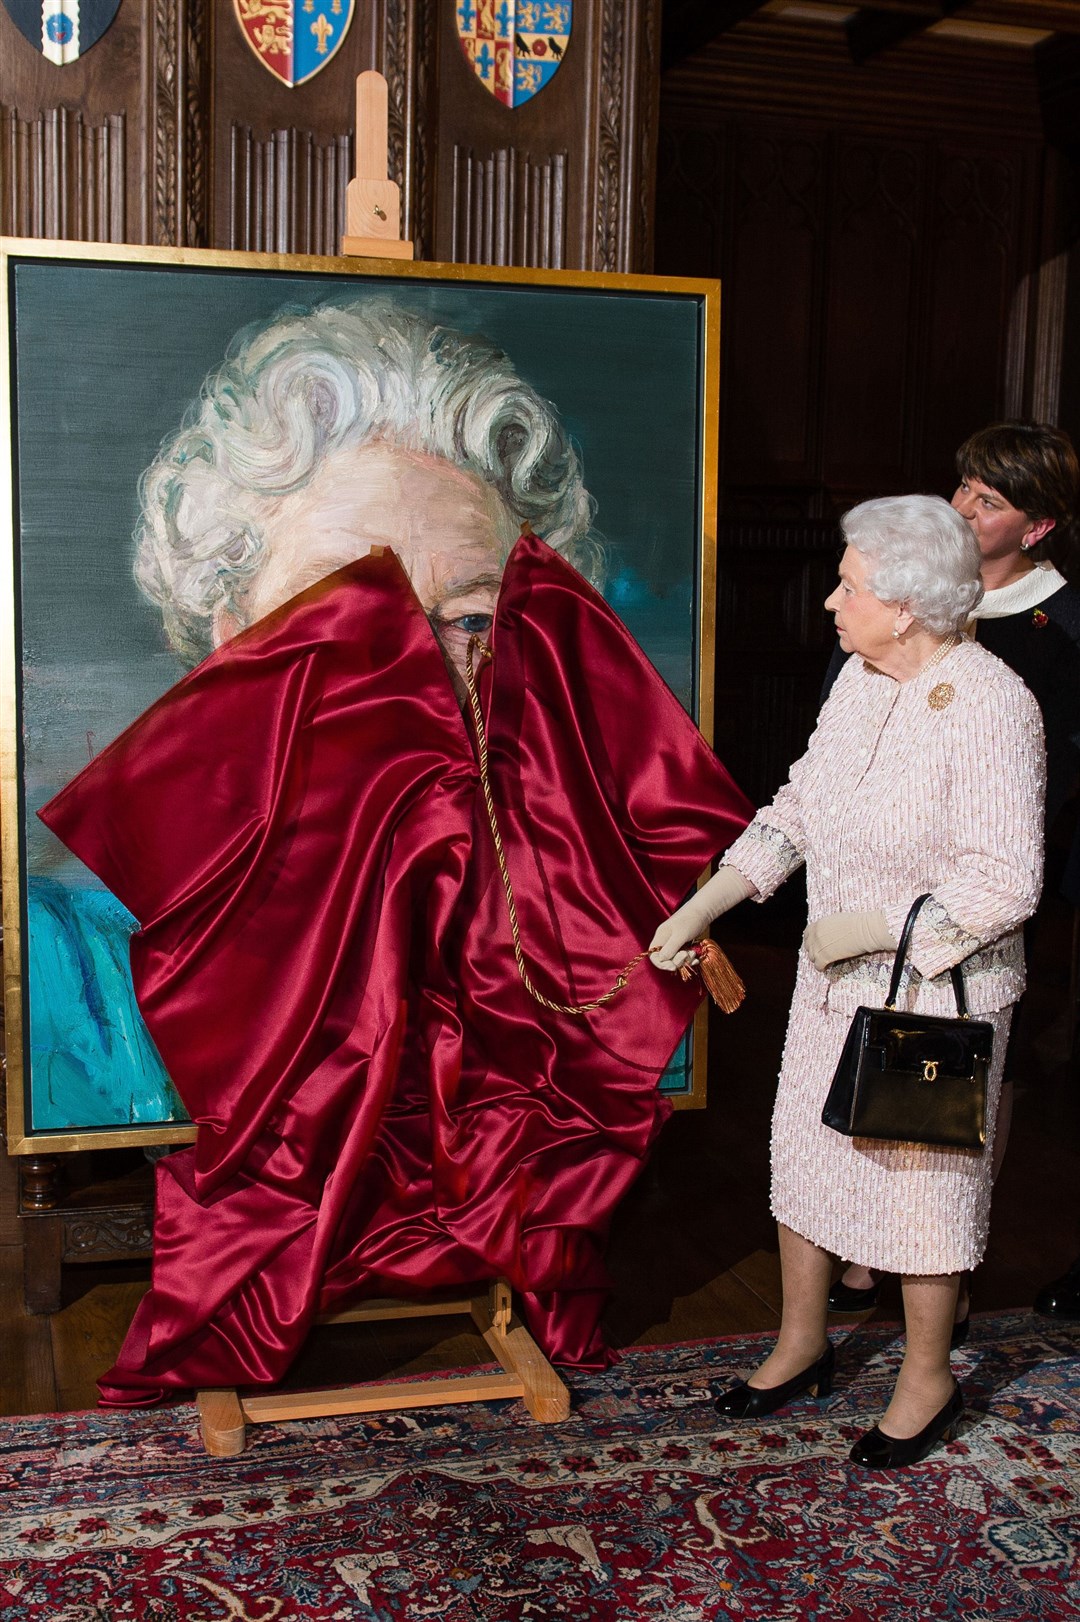 The Queen unveils the portrait of herself by artist Colin Davidson at Crosby Hall (Jeff Spicer/PA)